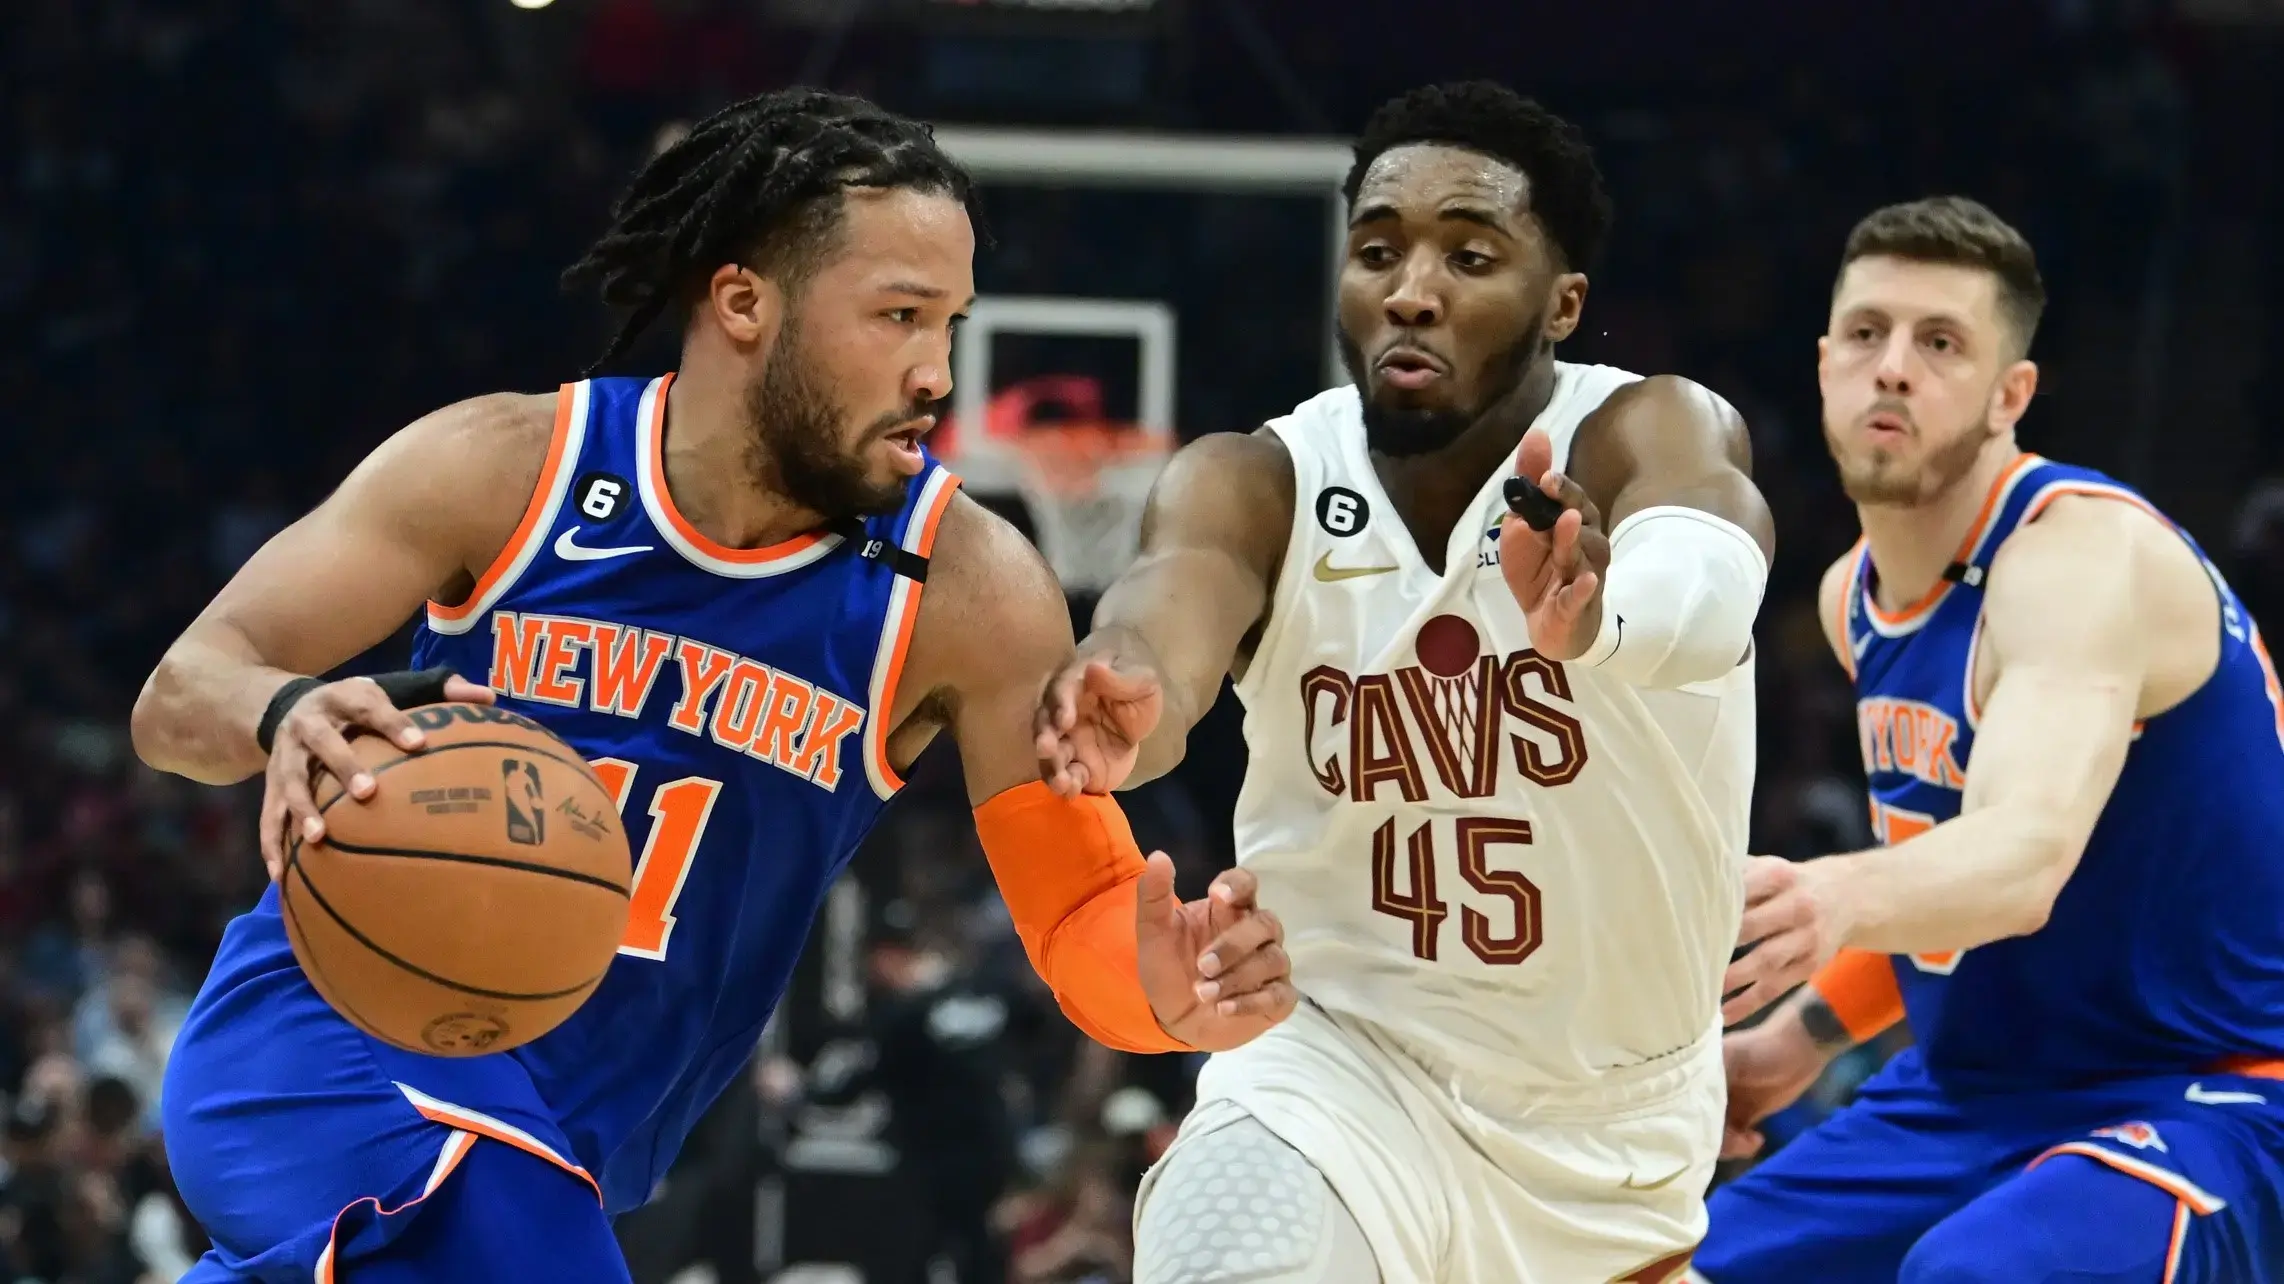 Mar 31, 2023; Cleveland, Ohio, USA; New York Knicks guard Jalen Brunson (11) drives to the basket against Cleveland Cavaliers guard Donovan Mitchell (45) during the first half at Rocket Mortgage FieldHouse. / Ken Blaze-USA TODAY Sports